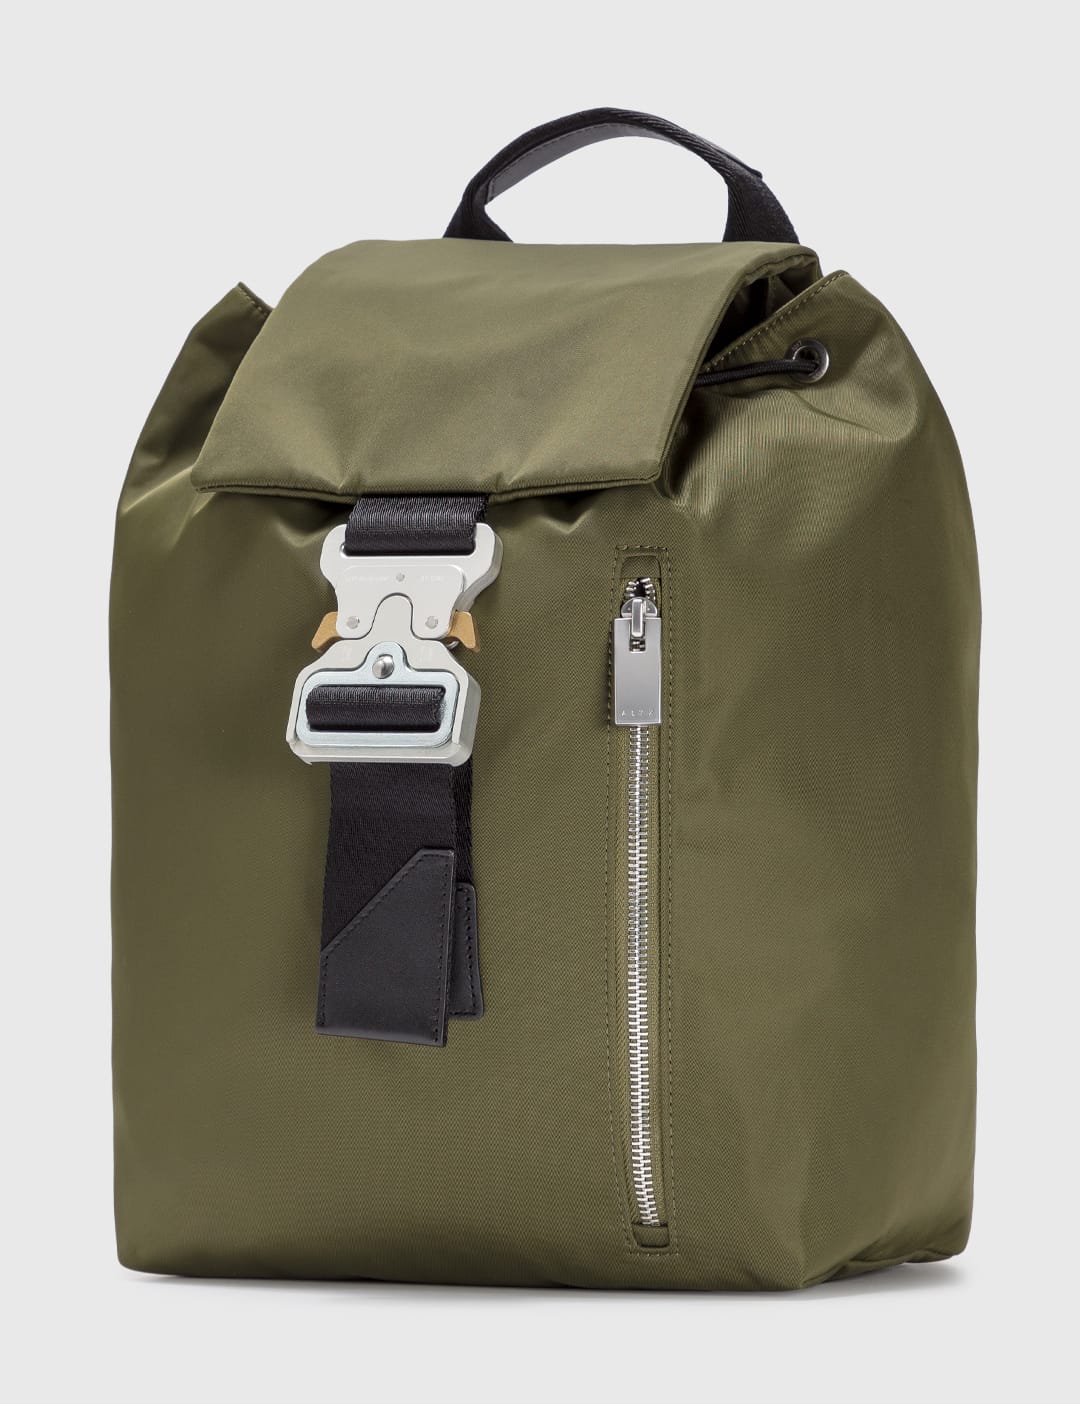 1017 ALYX 9SM - Tank Backpack | HBX - Globally Curated Fashion and